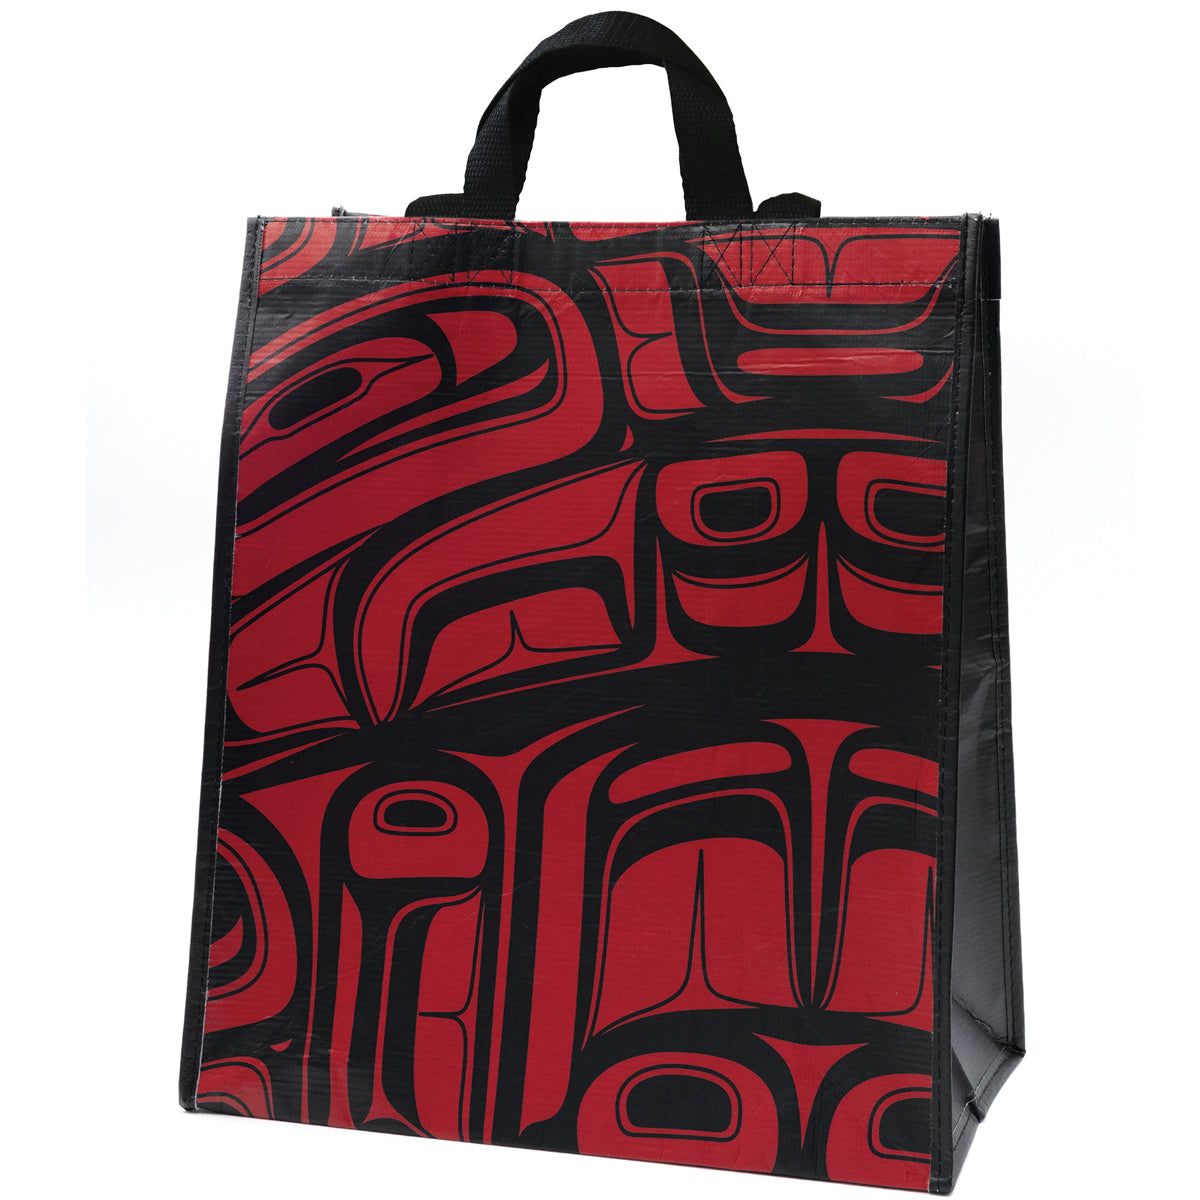 Eco Bag Large Corey W. Moraes In Spirit - Eco Bag Large Corey W. Moraes In Spirit -  - House of Himwitsa Native Art Gallery and Gifts